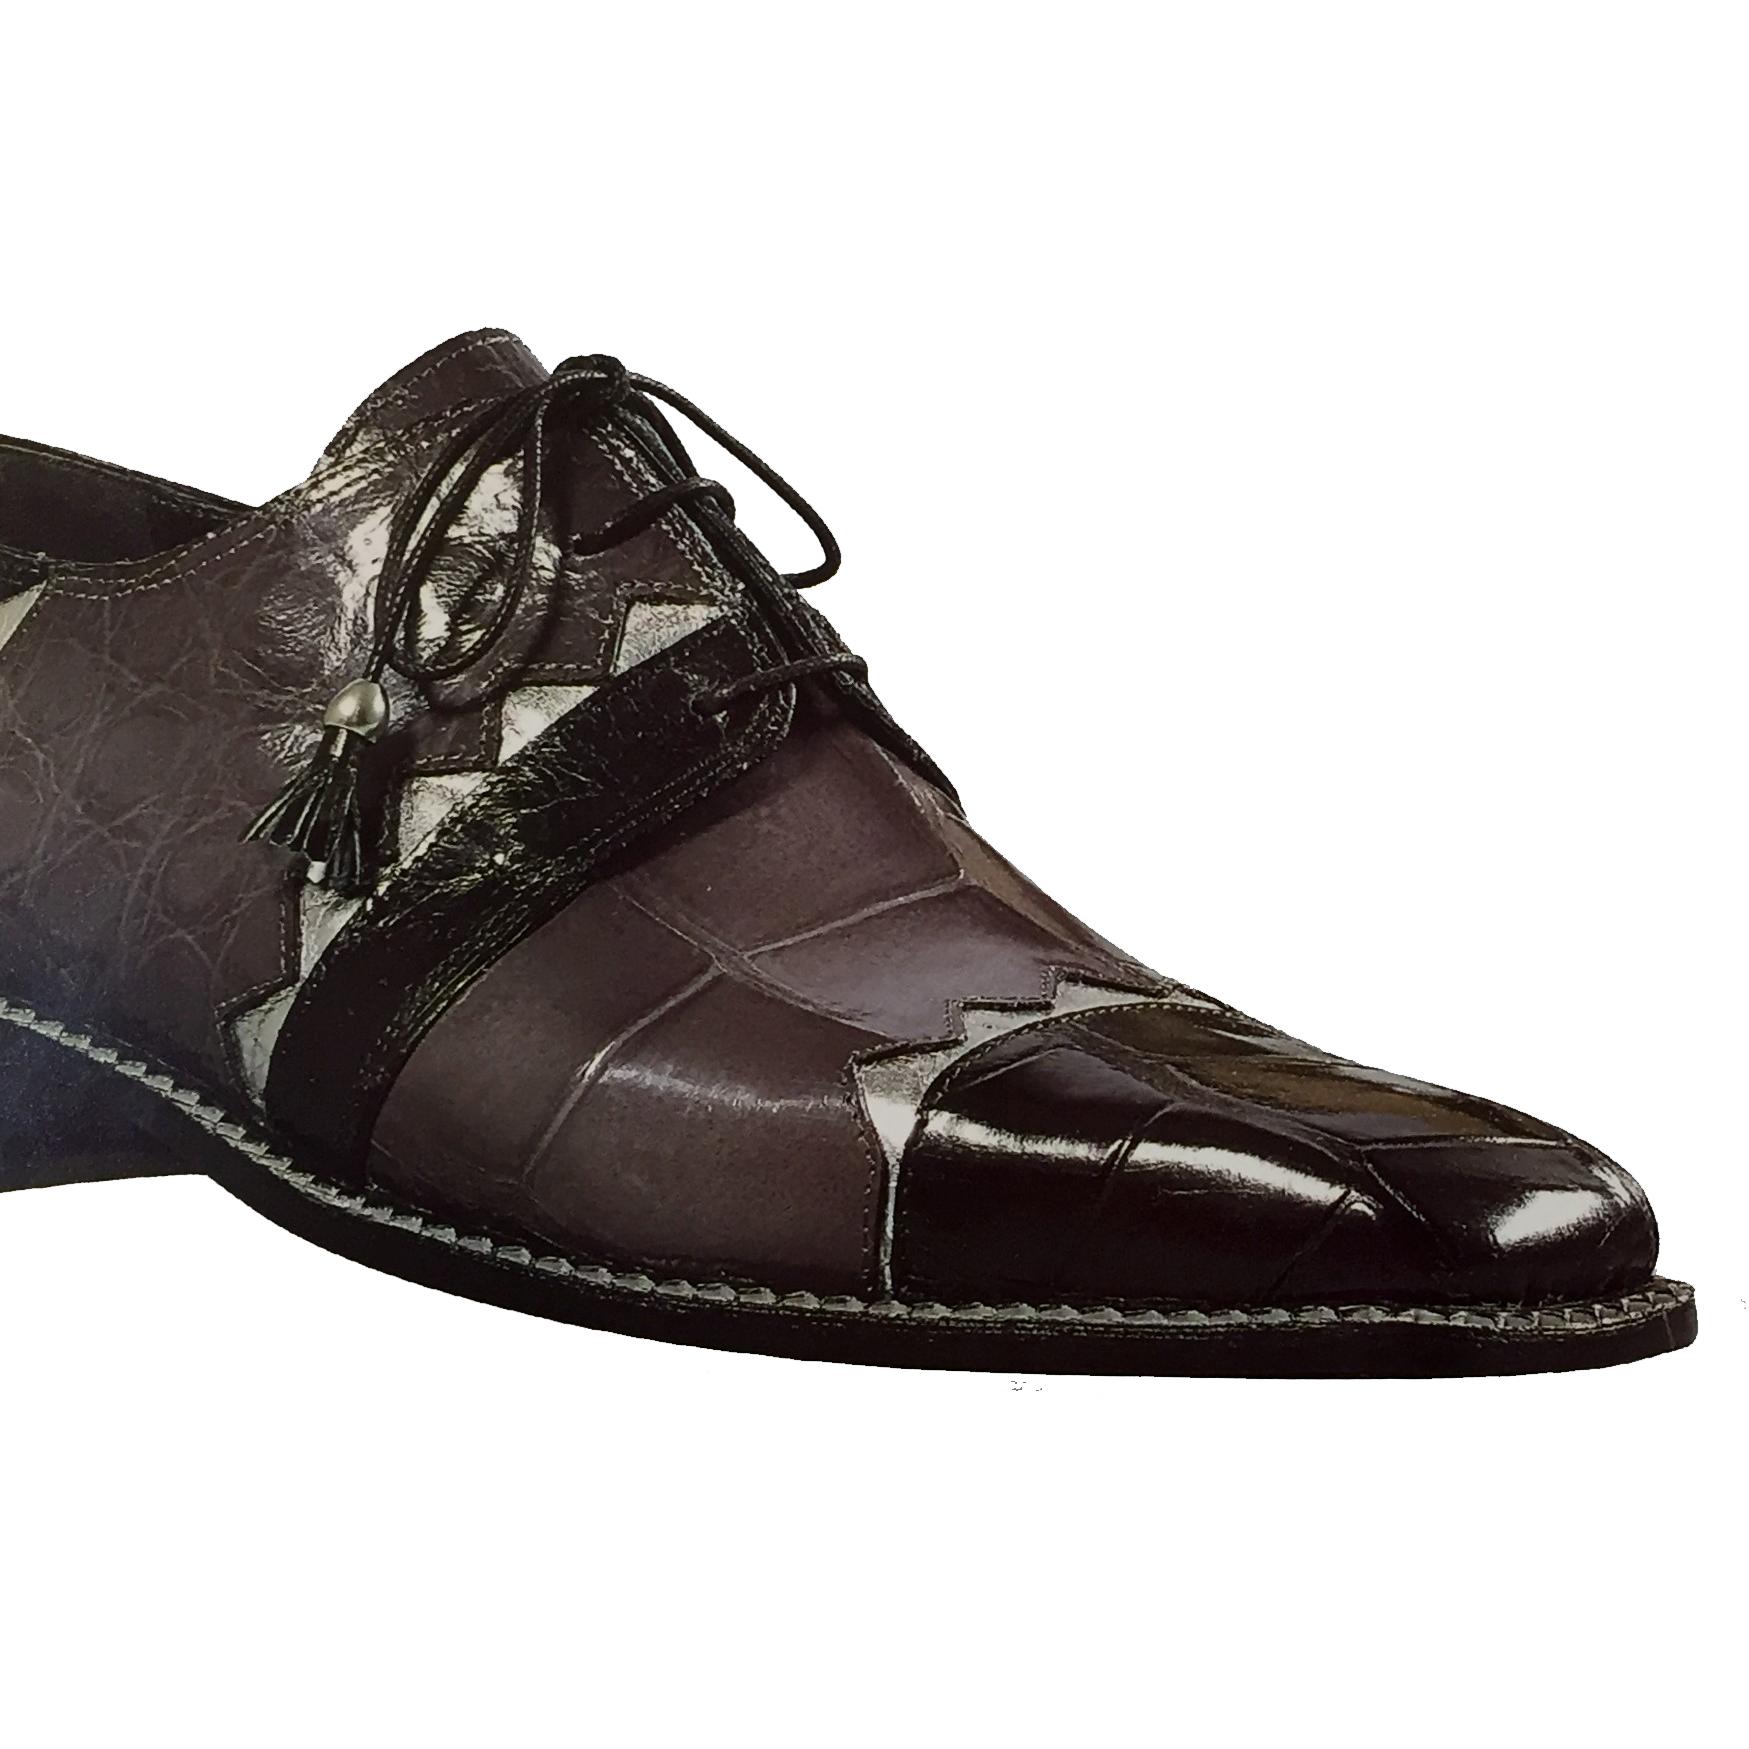 Mauri Black and Grey Silver Alligator Leather Shoes | Upscale Menswear